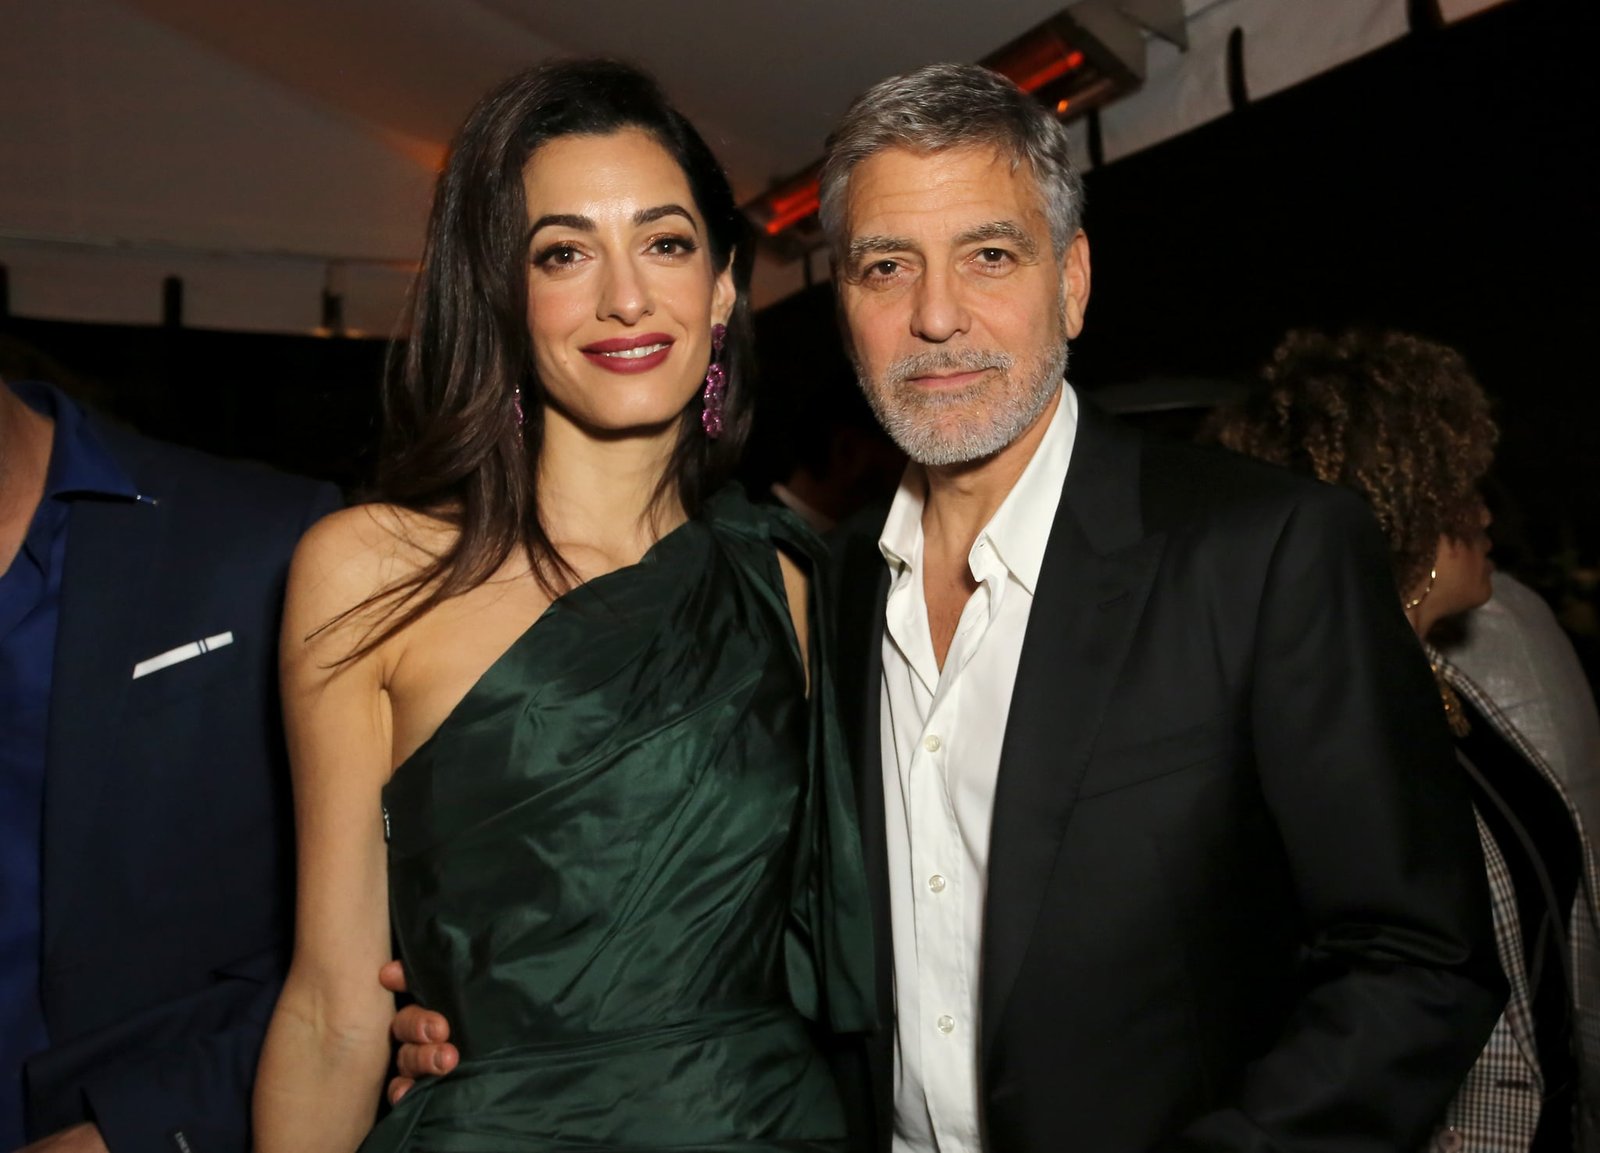 George Clooney will become a father again: Amal Clooney is pregnant